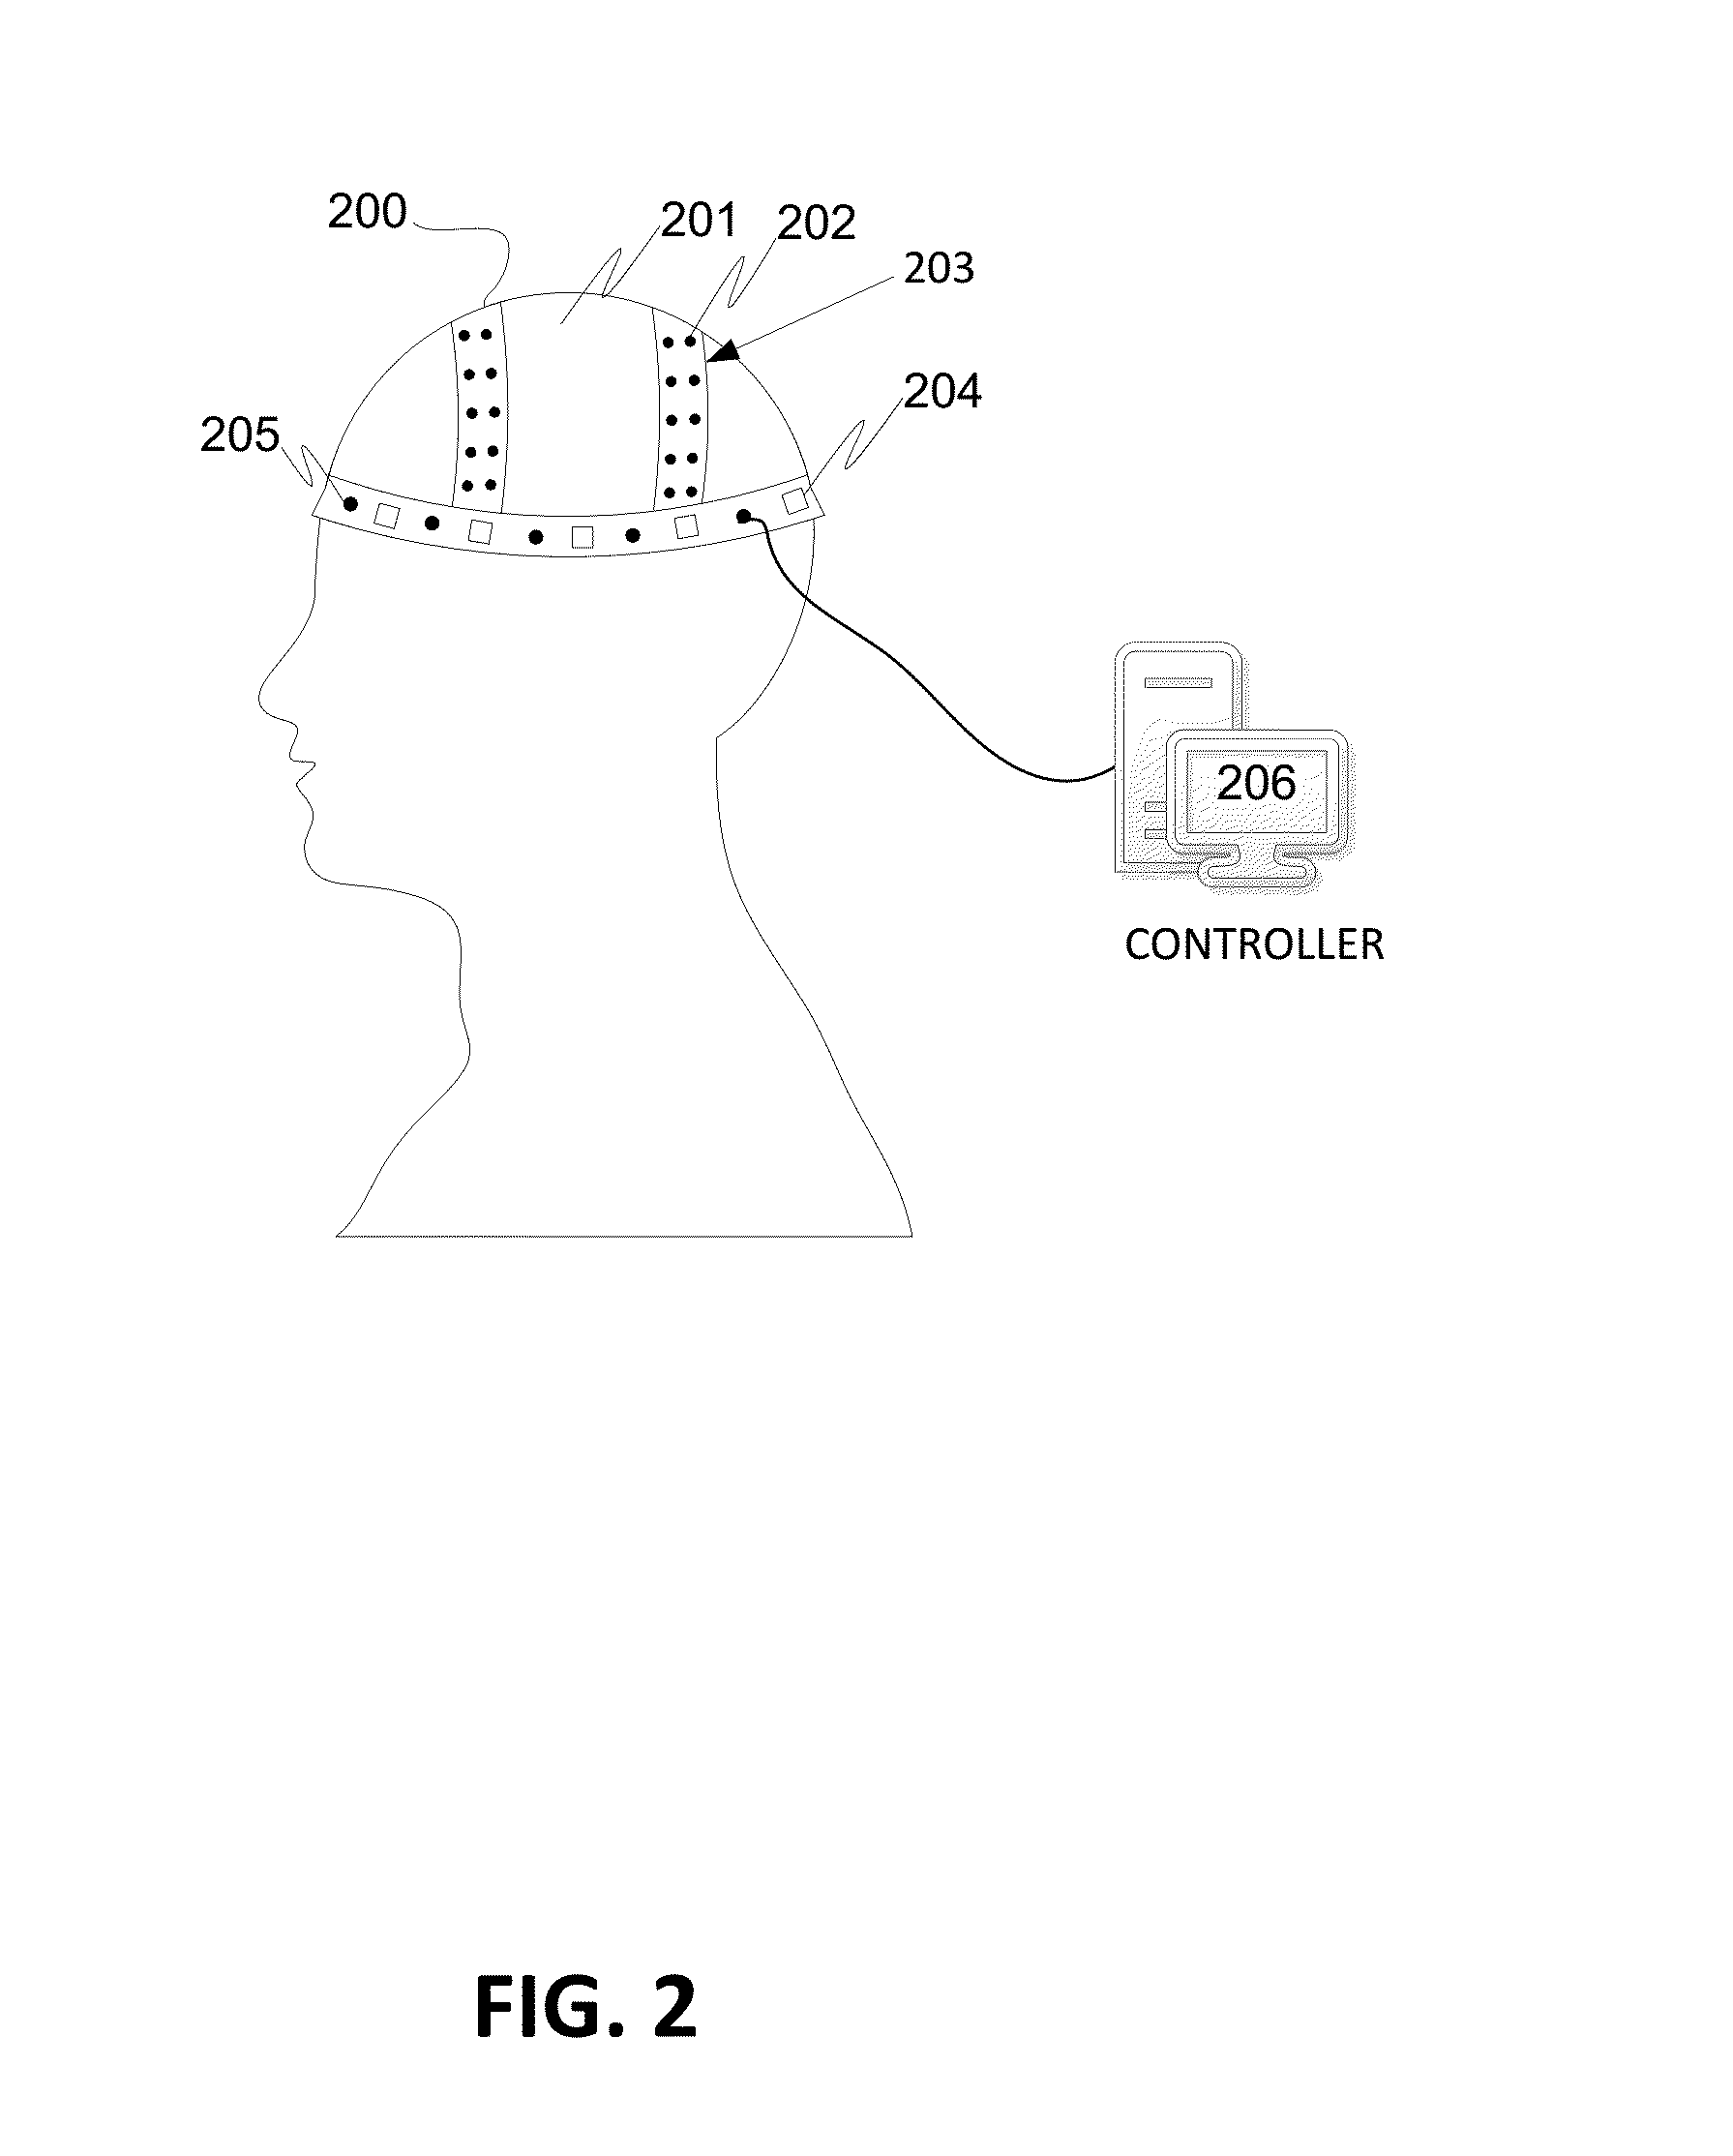 Systems and methods for directed energy cranial therapeutics